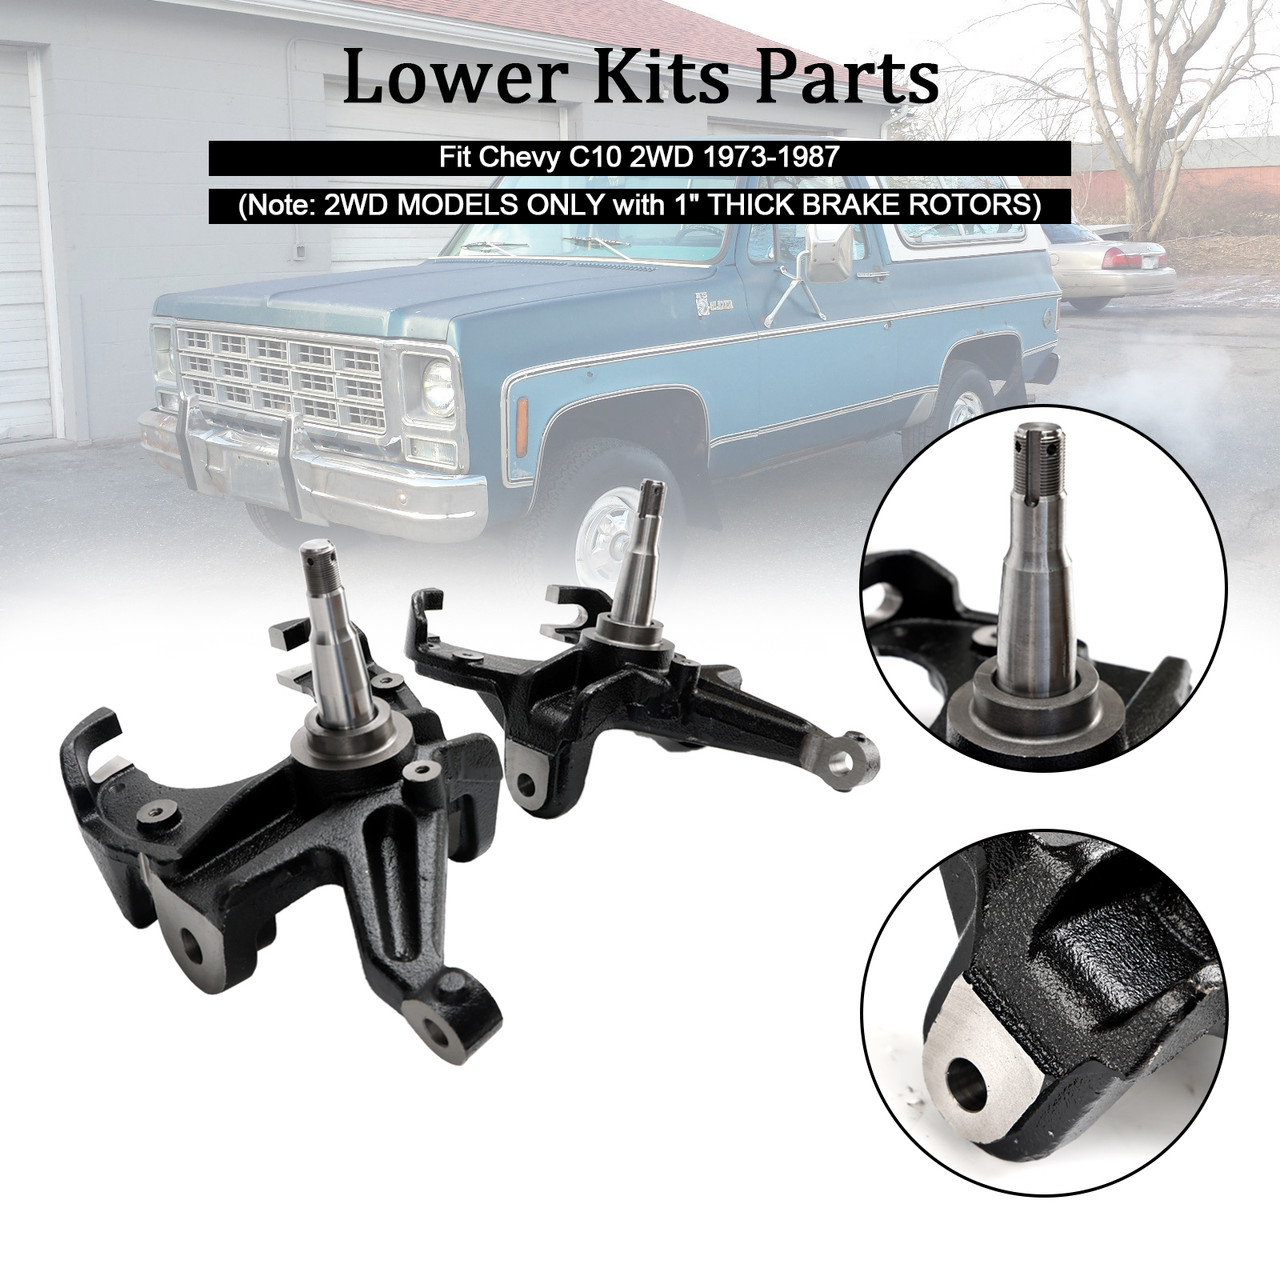 2.5" Front Drop Spindle Lowering Kit with Rotor 1" Fit Chevy C10 2WD 1973-1987